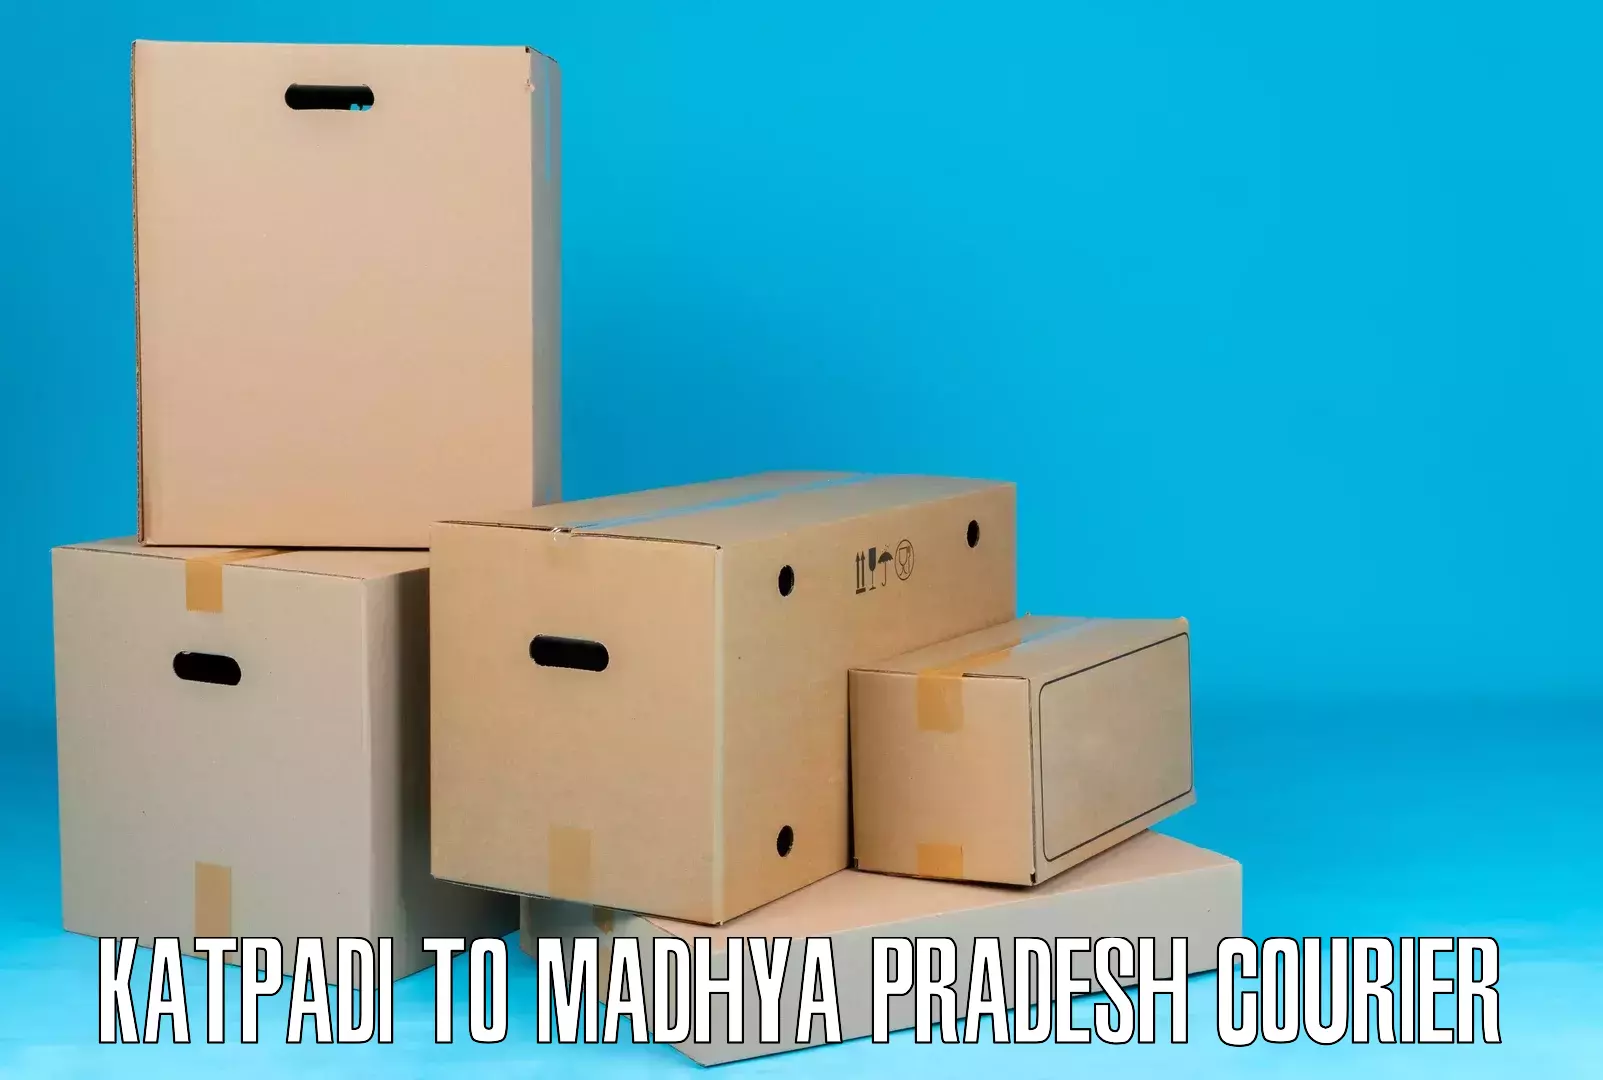 Heavy parcel delivery Katpadi to IIIT Bhopal